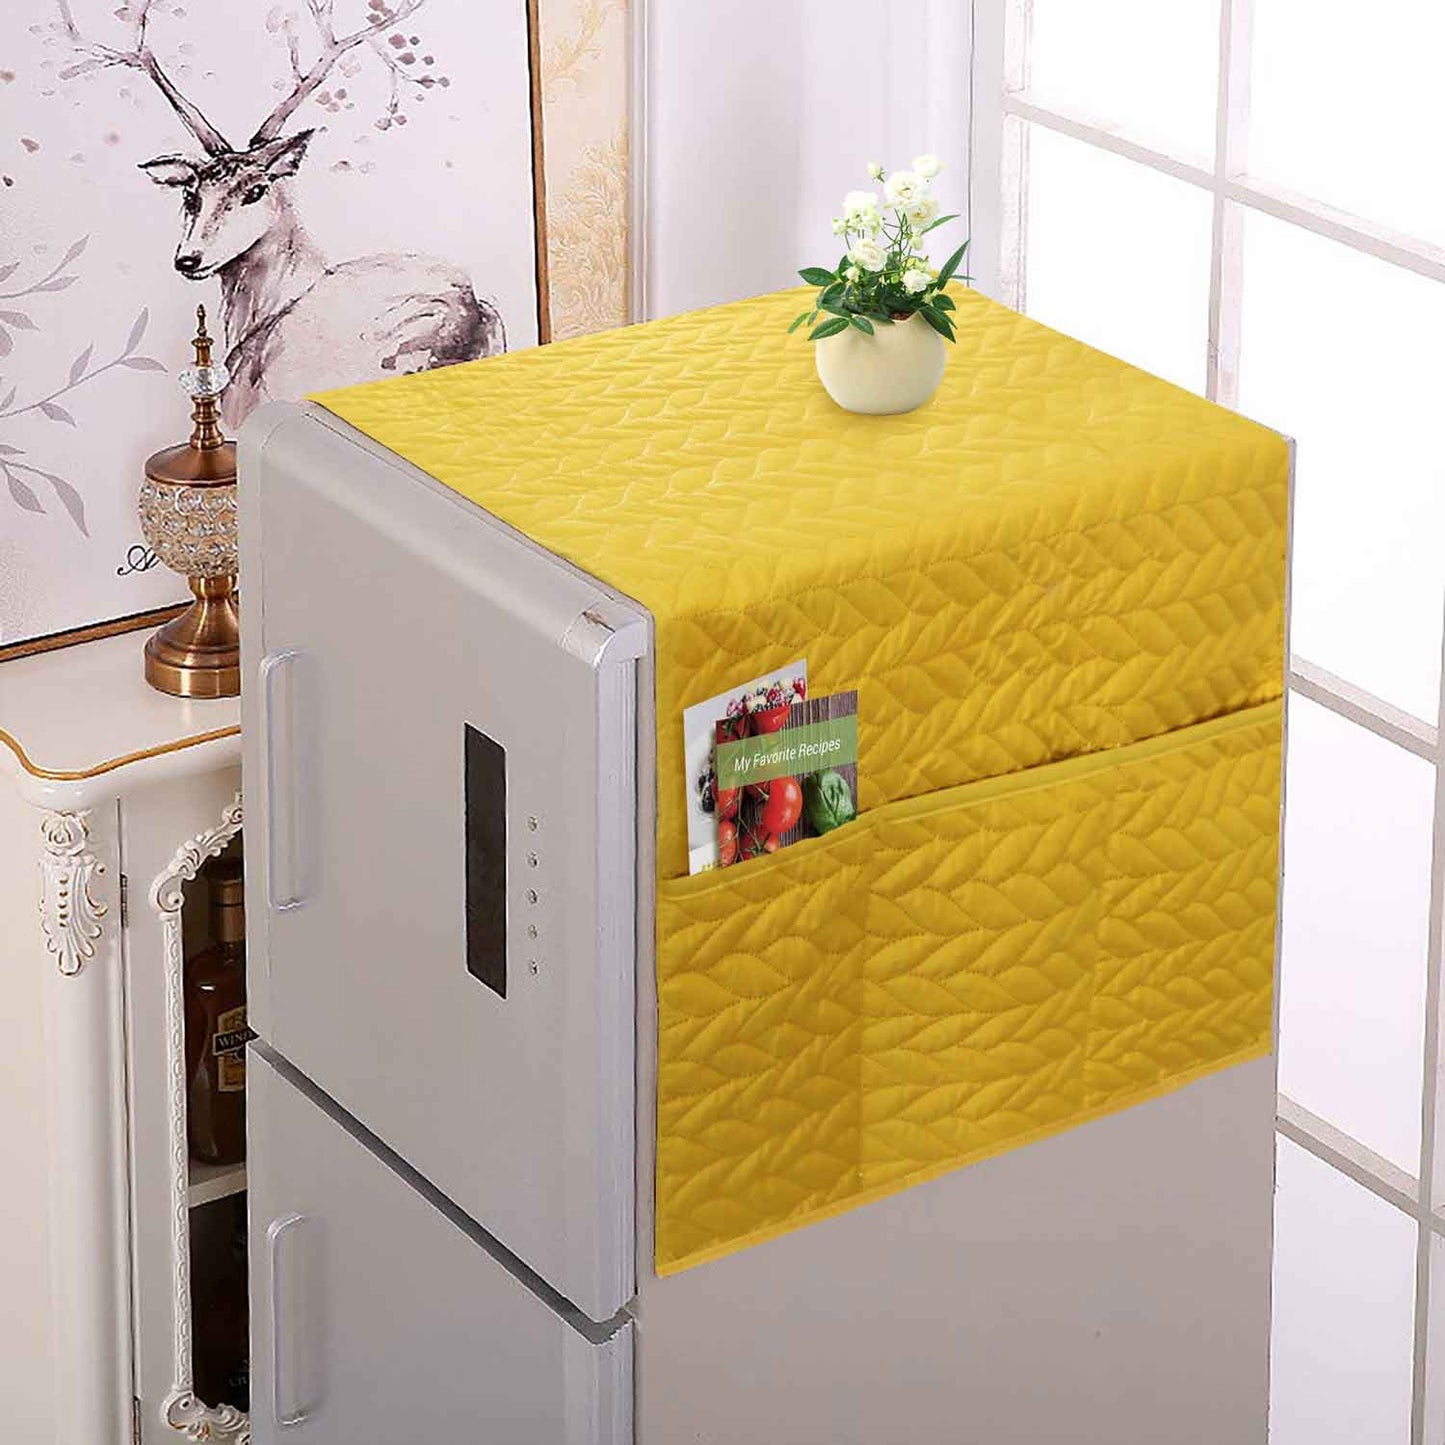 Dustproof Quilted Refrigerator Cover With Side Pockets-Mustard